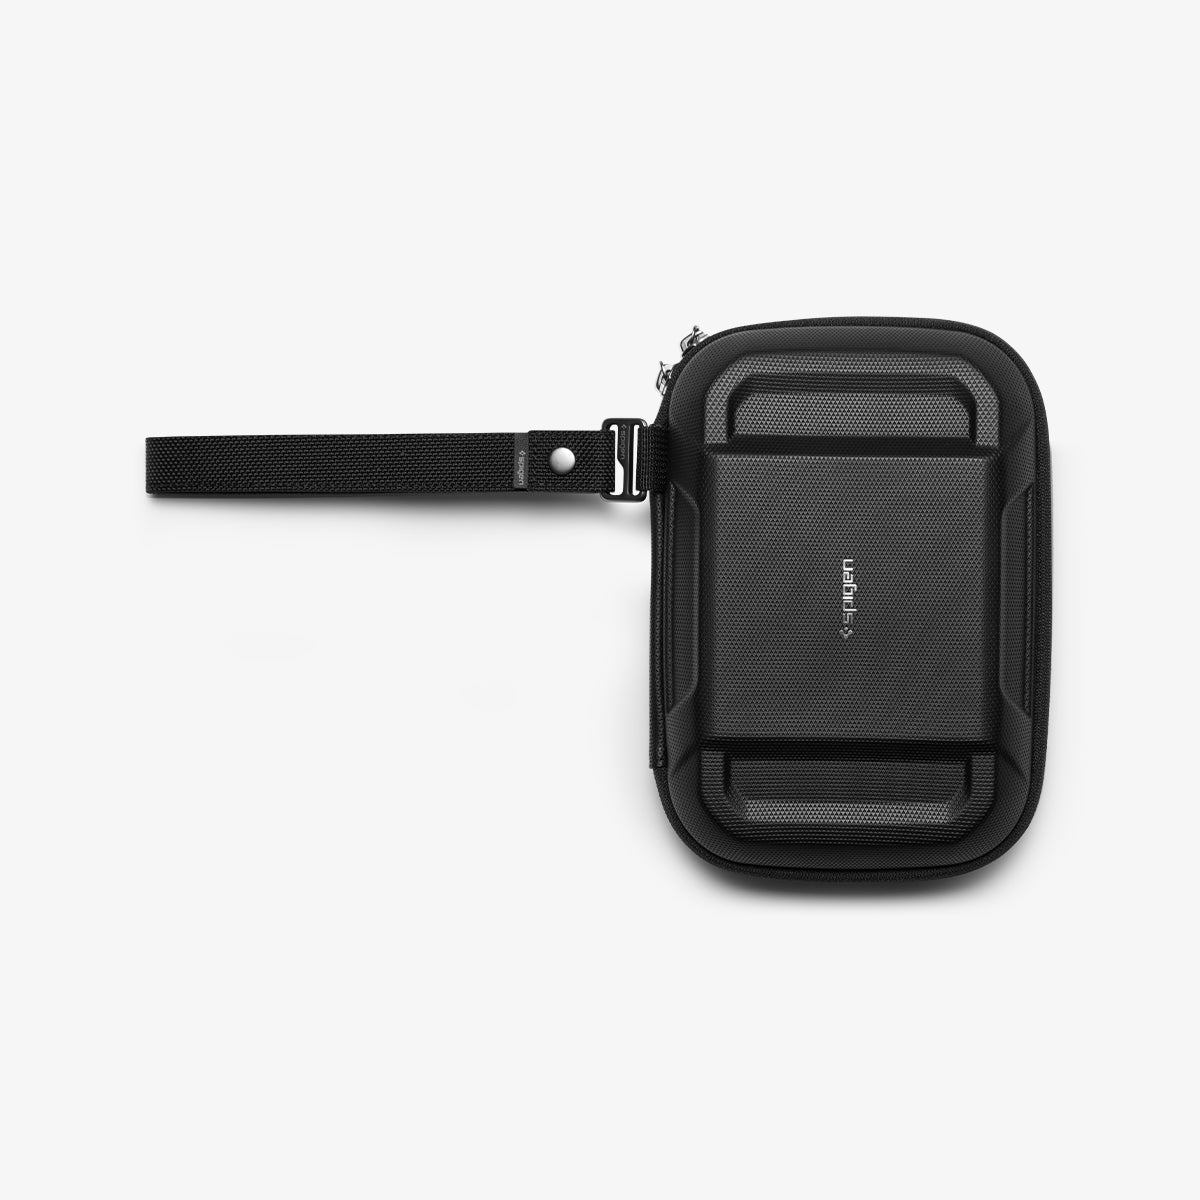 AFA04310 - DJI Action 2 Case Rugged Armor Pro Pouch in black showing the front and attached strap